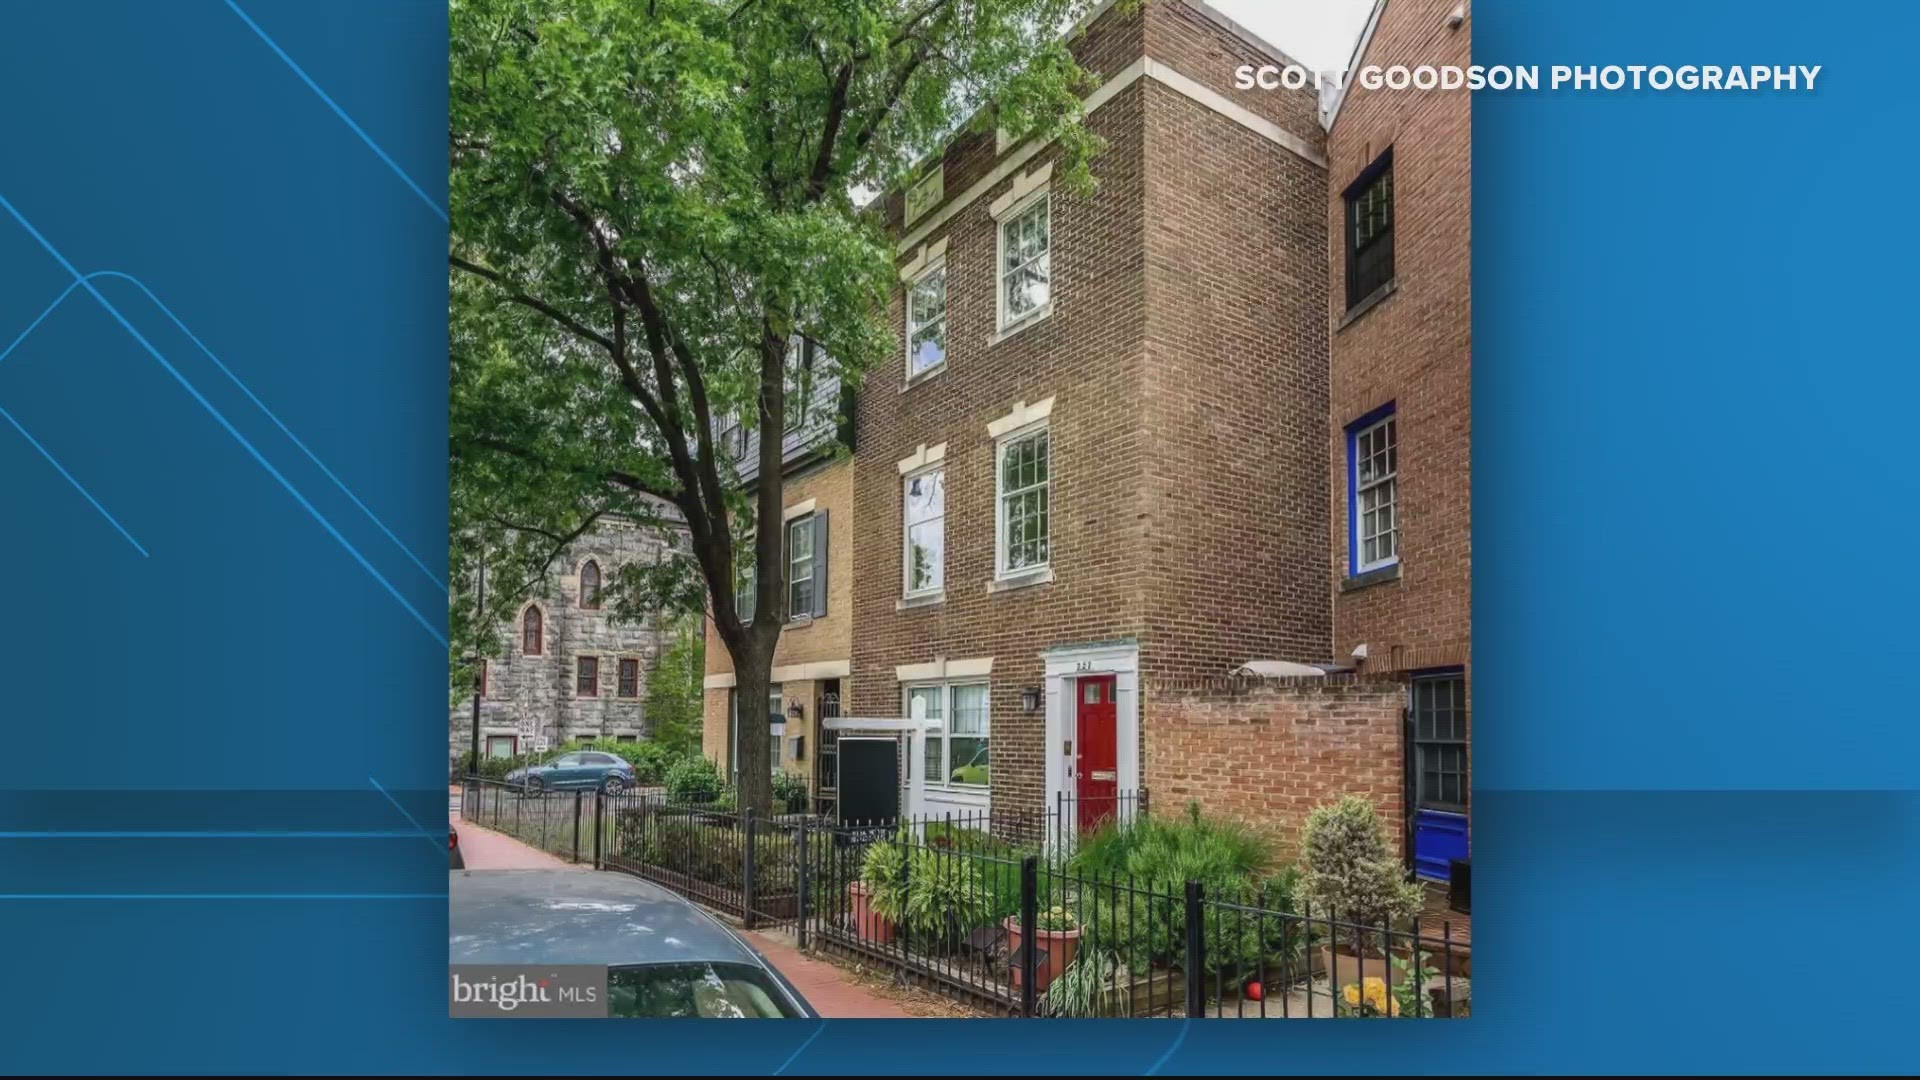 The Stanton Park townhouse in which former President Barack Obama lived when he was a senator is for sale.